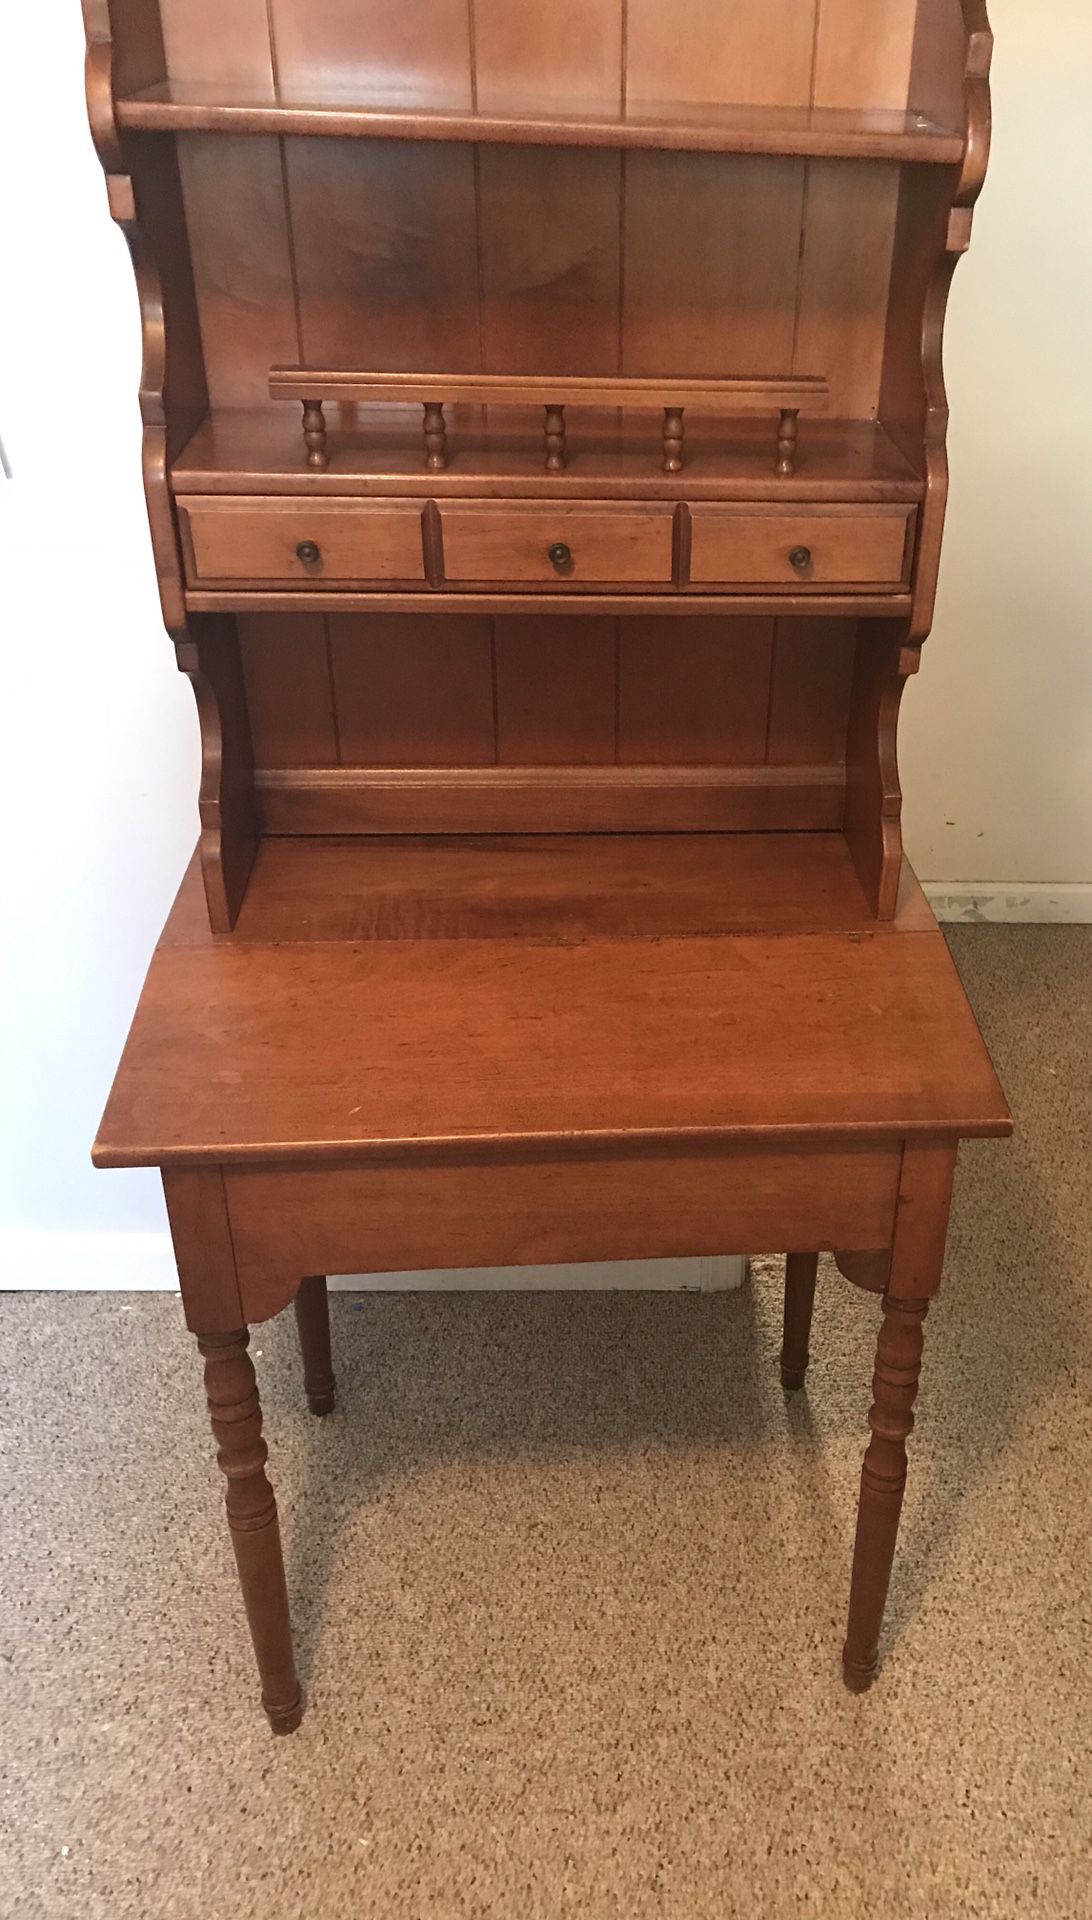 Antique desk with hutch